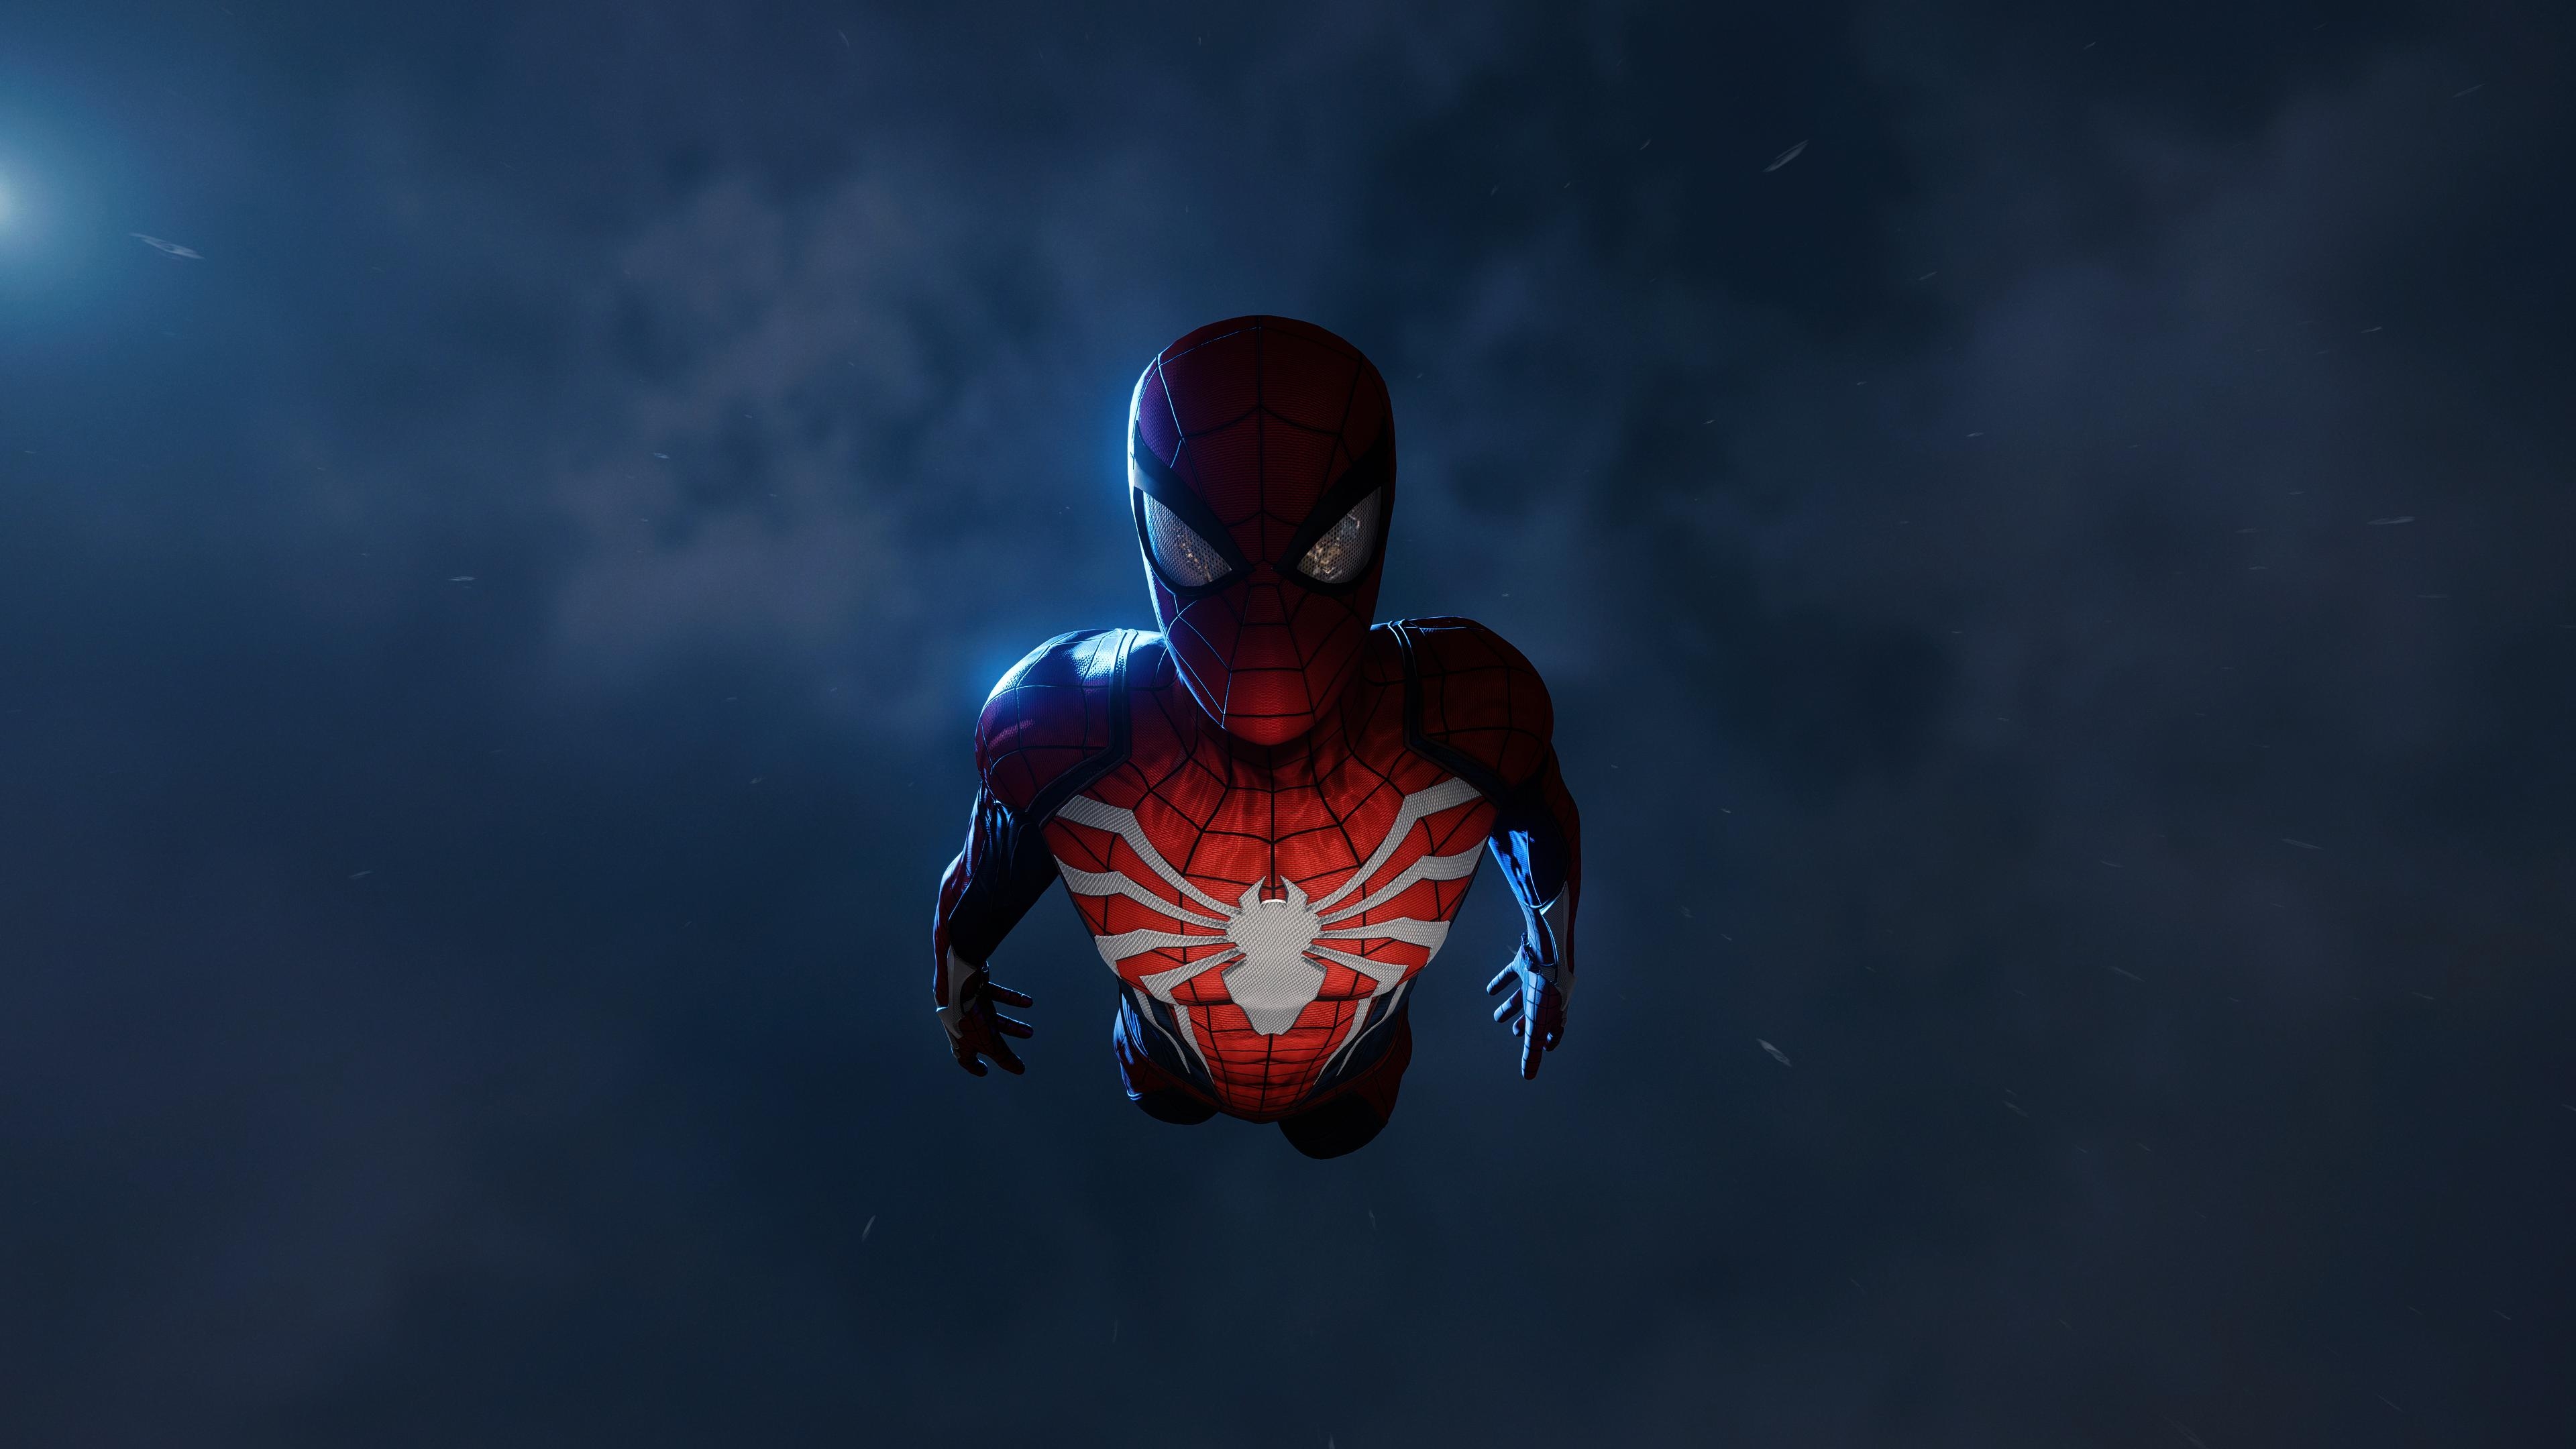 Wallpaper miles morales across the spider-verse, falling from building,  movie desktop wallpaper, hd image, picture, background, eb94c0 |  wallpapersmug